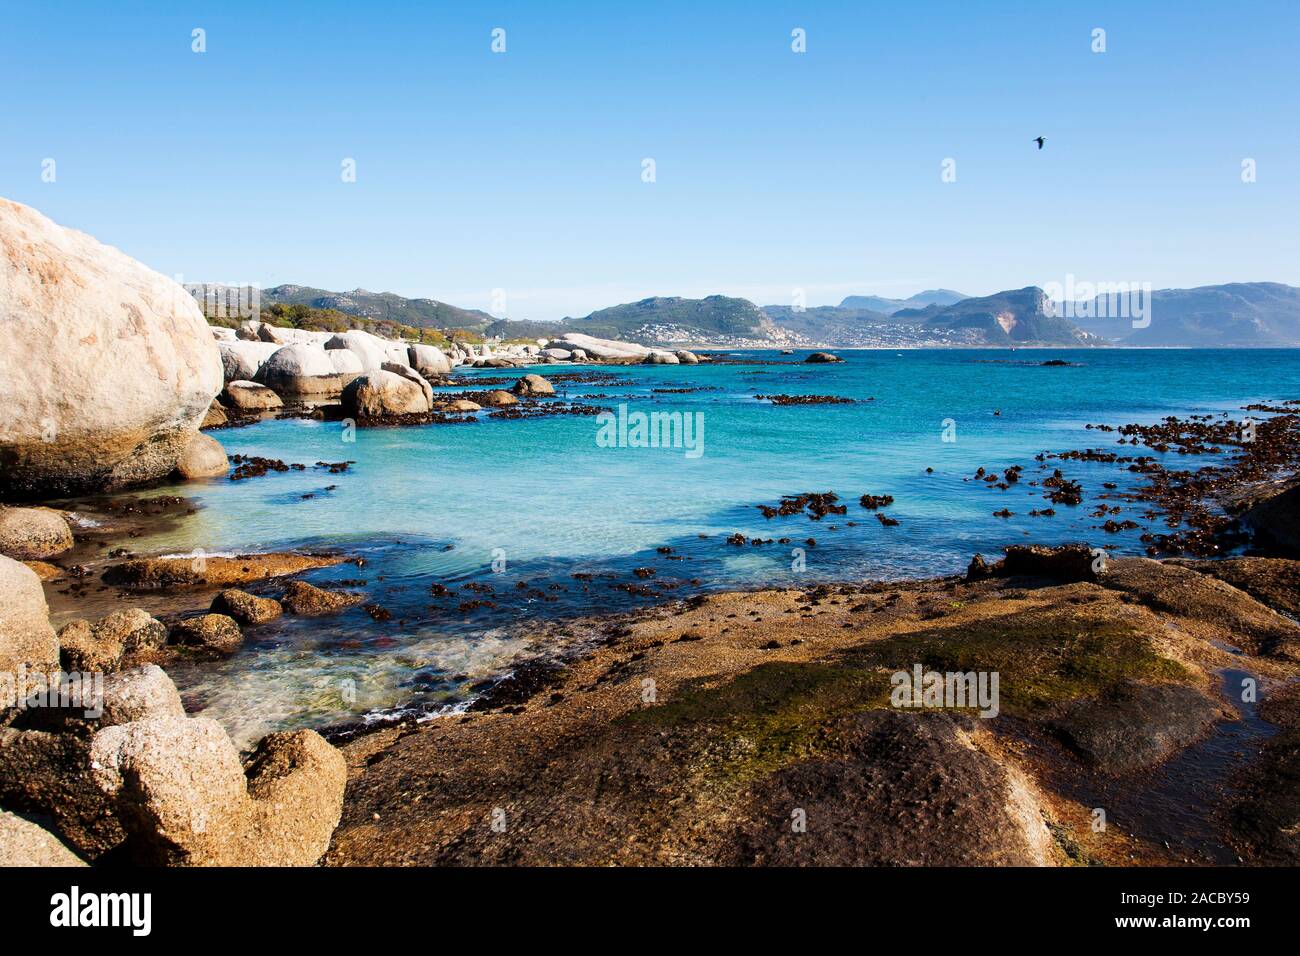 Cape Town - beautiful bays of Boulders Beach Nature Reserve. This beach is famous for its protected colony of African Penguins. South Africa. Stock Photo